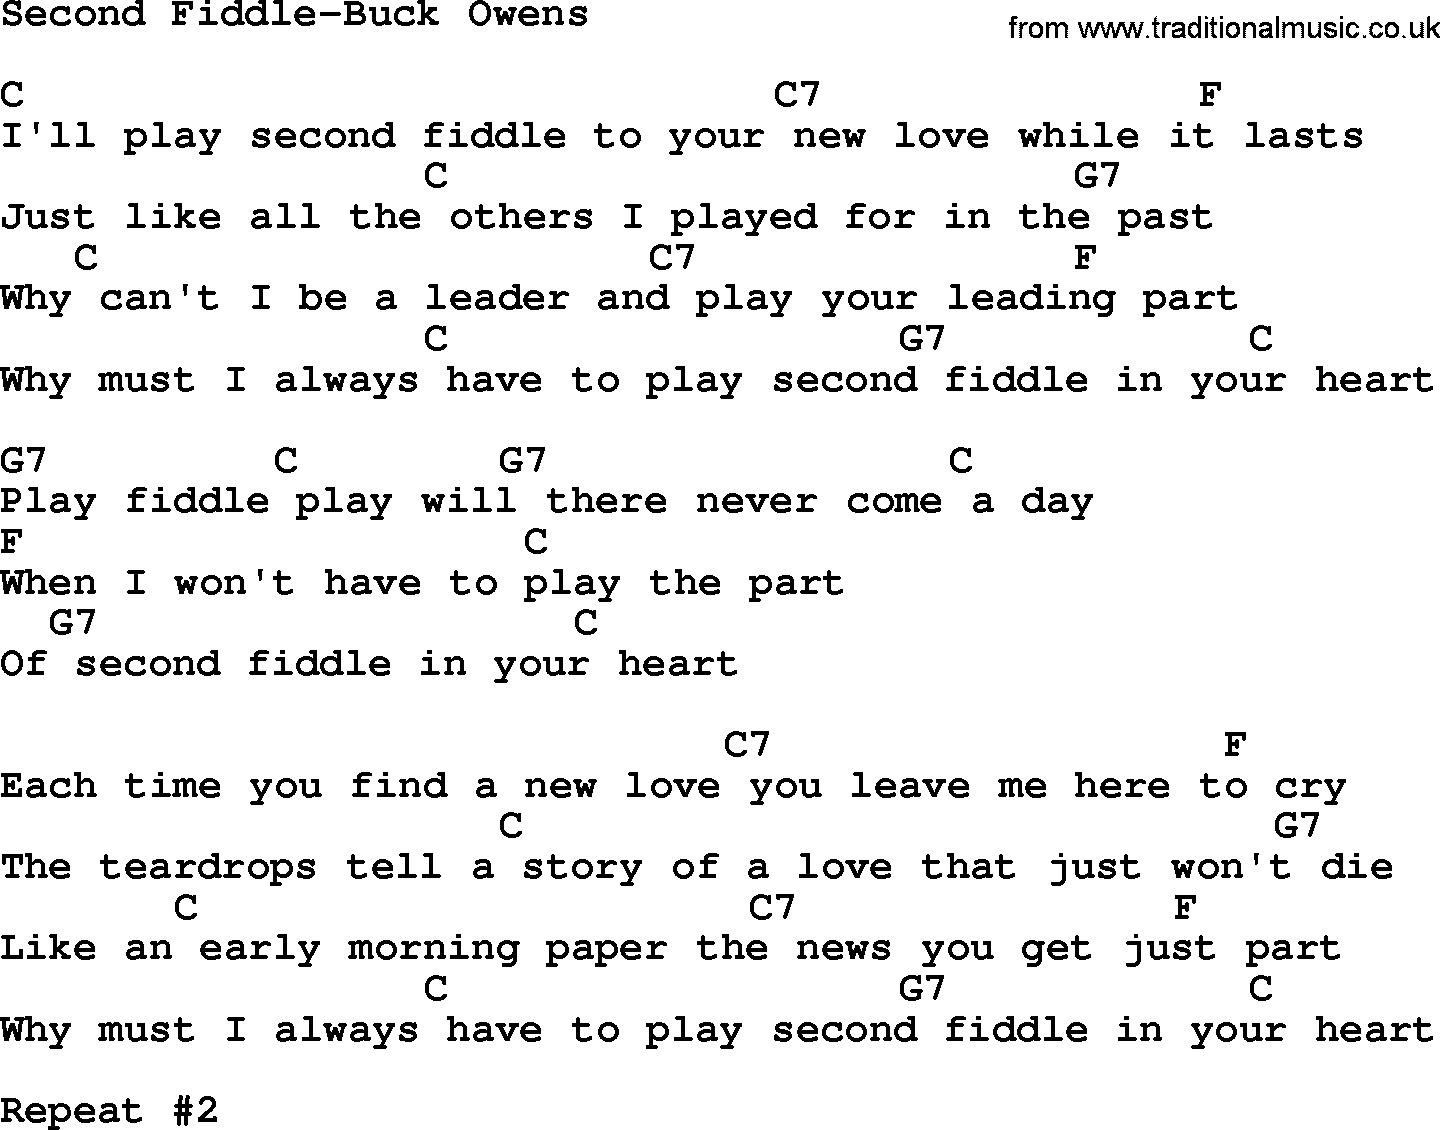 Country music song: Second Fiddle-Buck Owens lyrics and chords